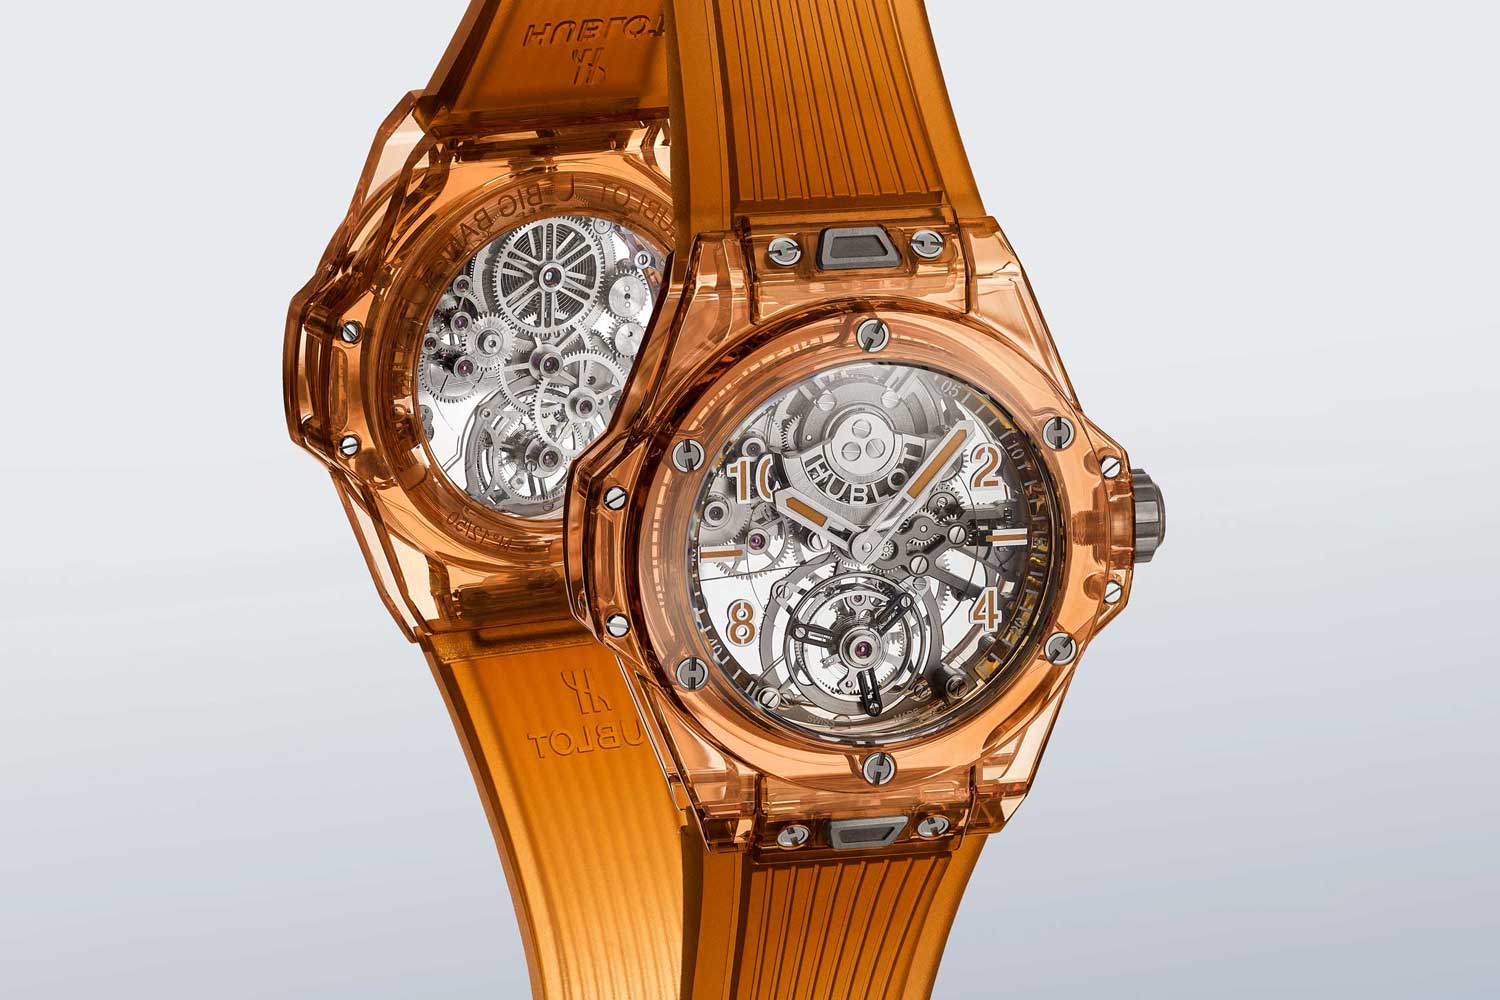 Hublot's orange sapphire is a world first for a material that is through-tinted and is achieved by the use of titanium and chromium in a top-secret manufacturing process